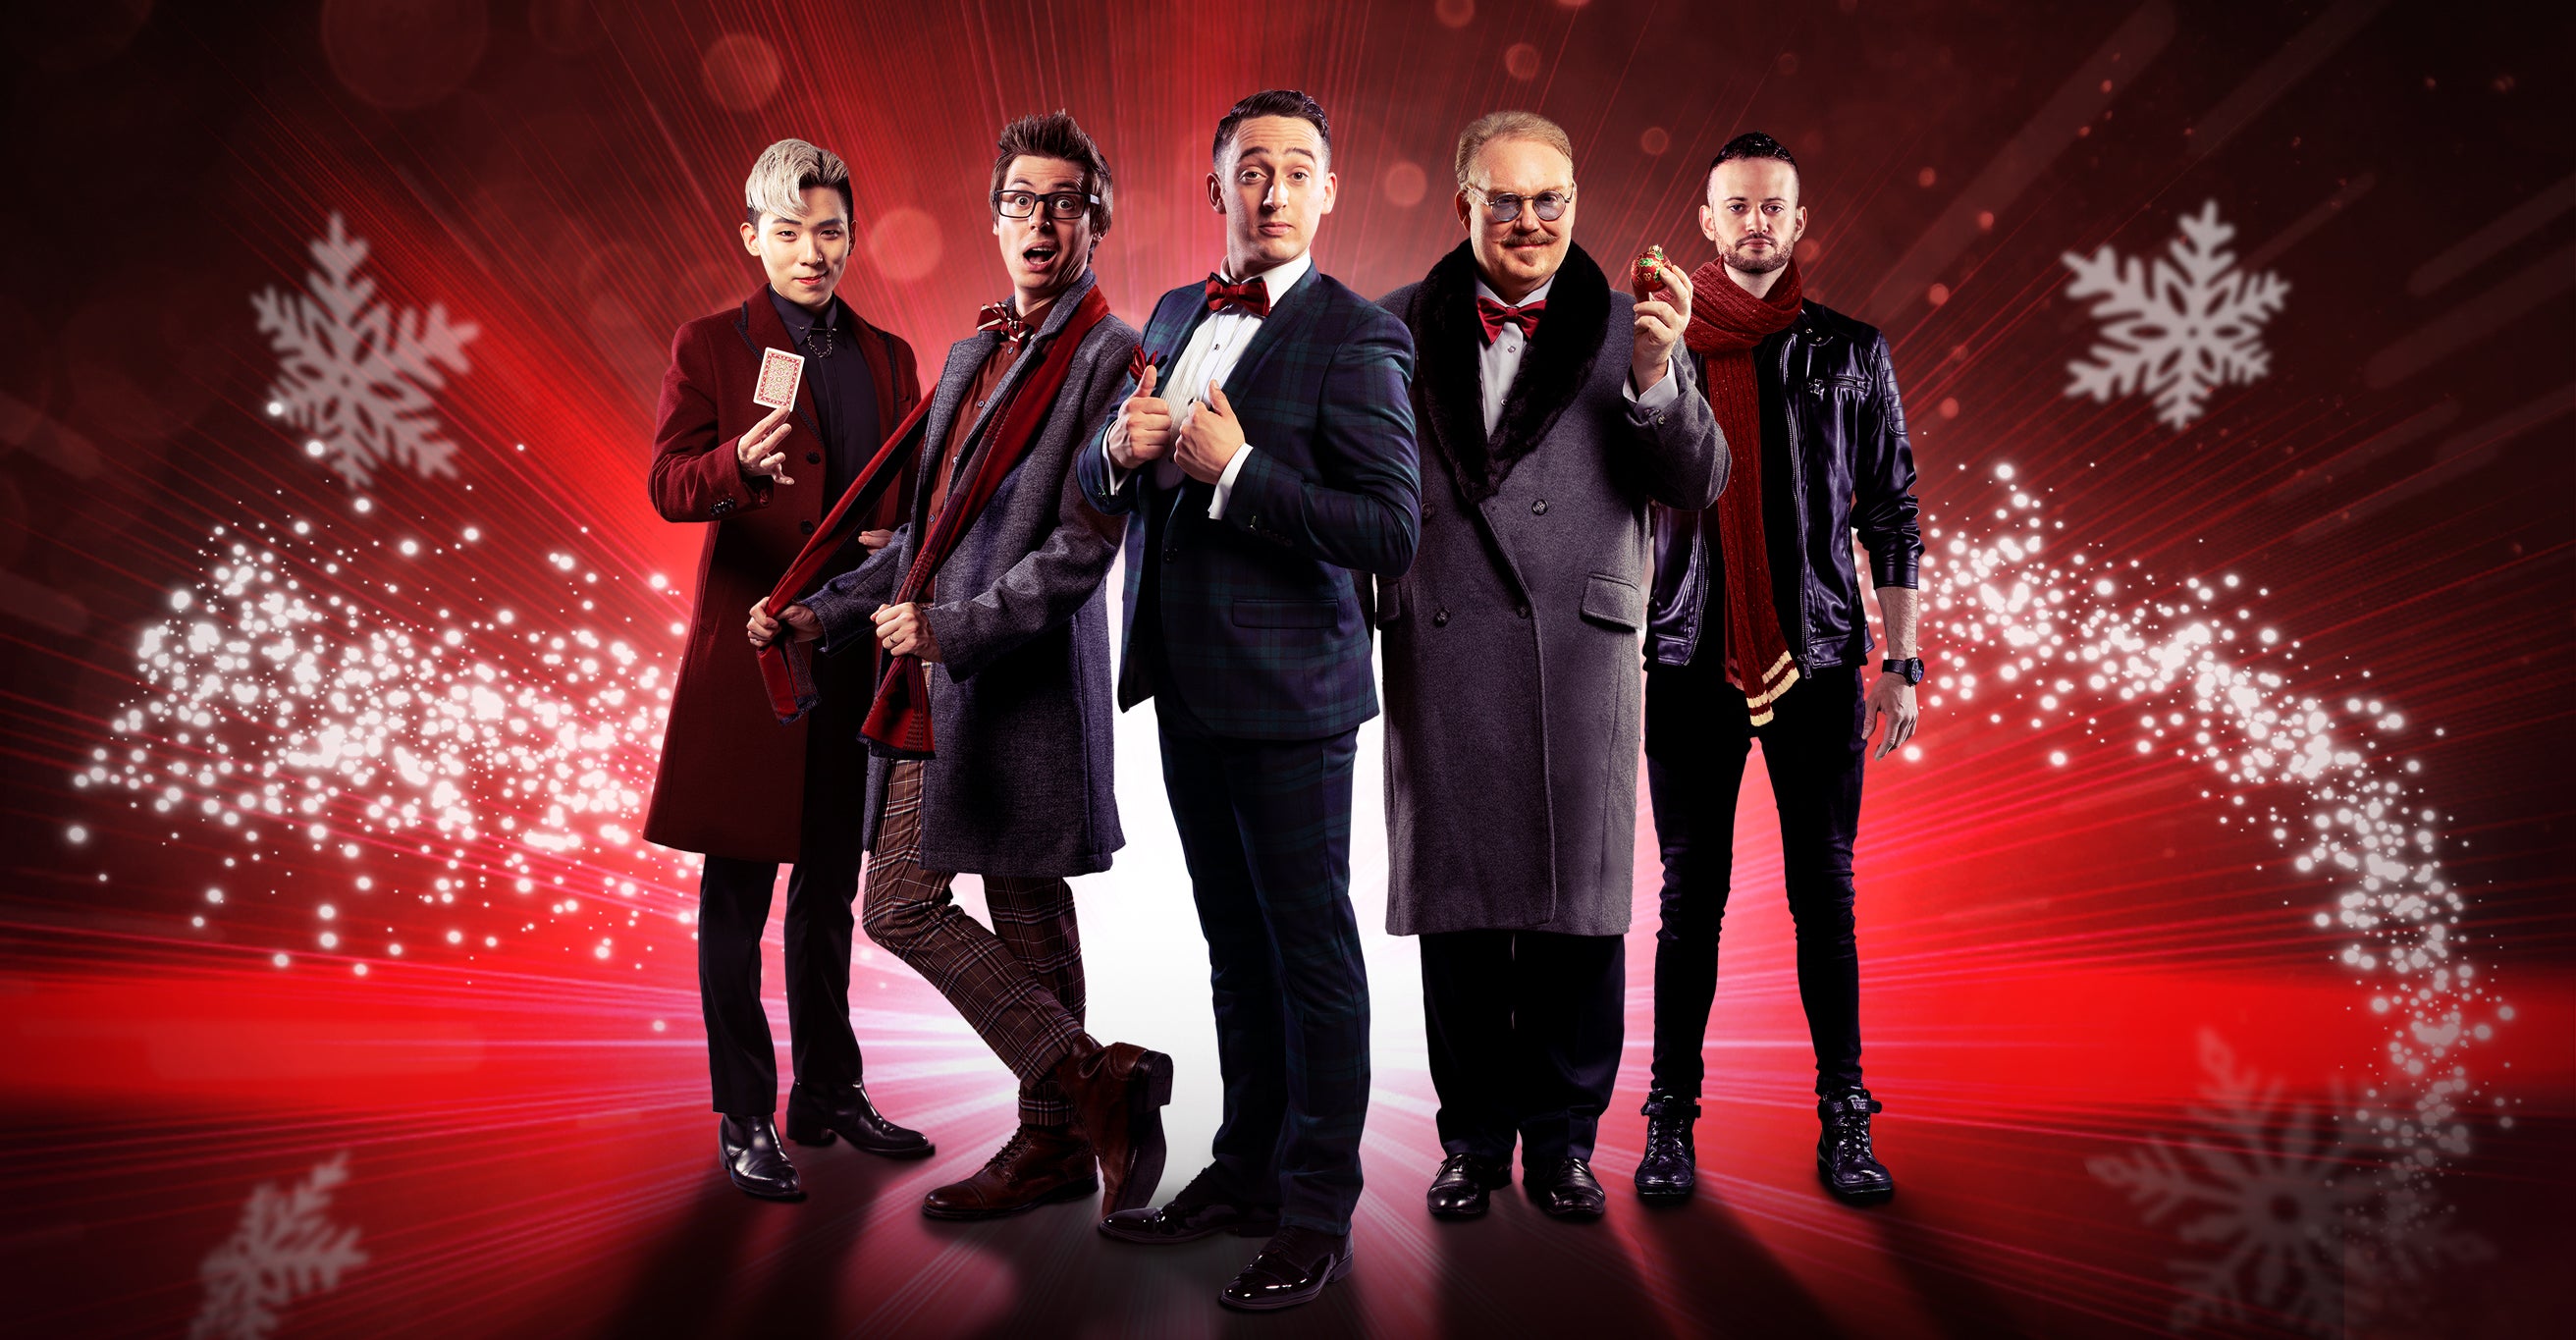 working presale password to The Illusionists: Magic of the Holidays tickets in Dallas at Majestic Theatre Dallas